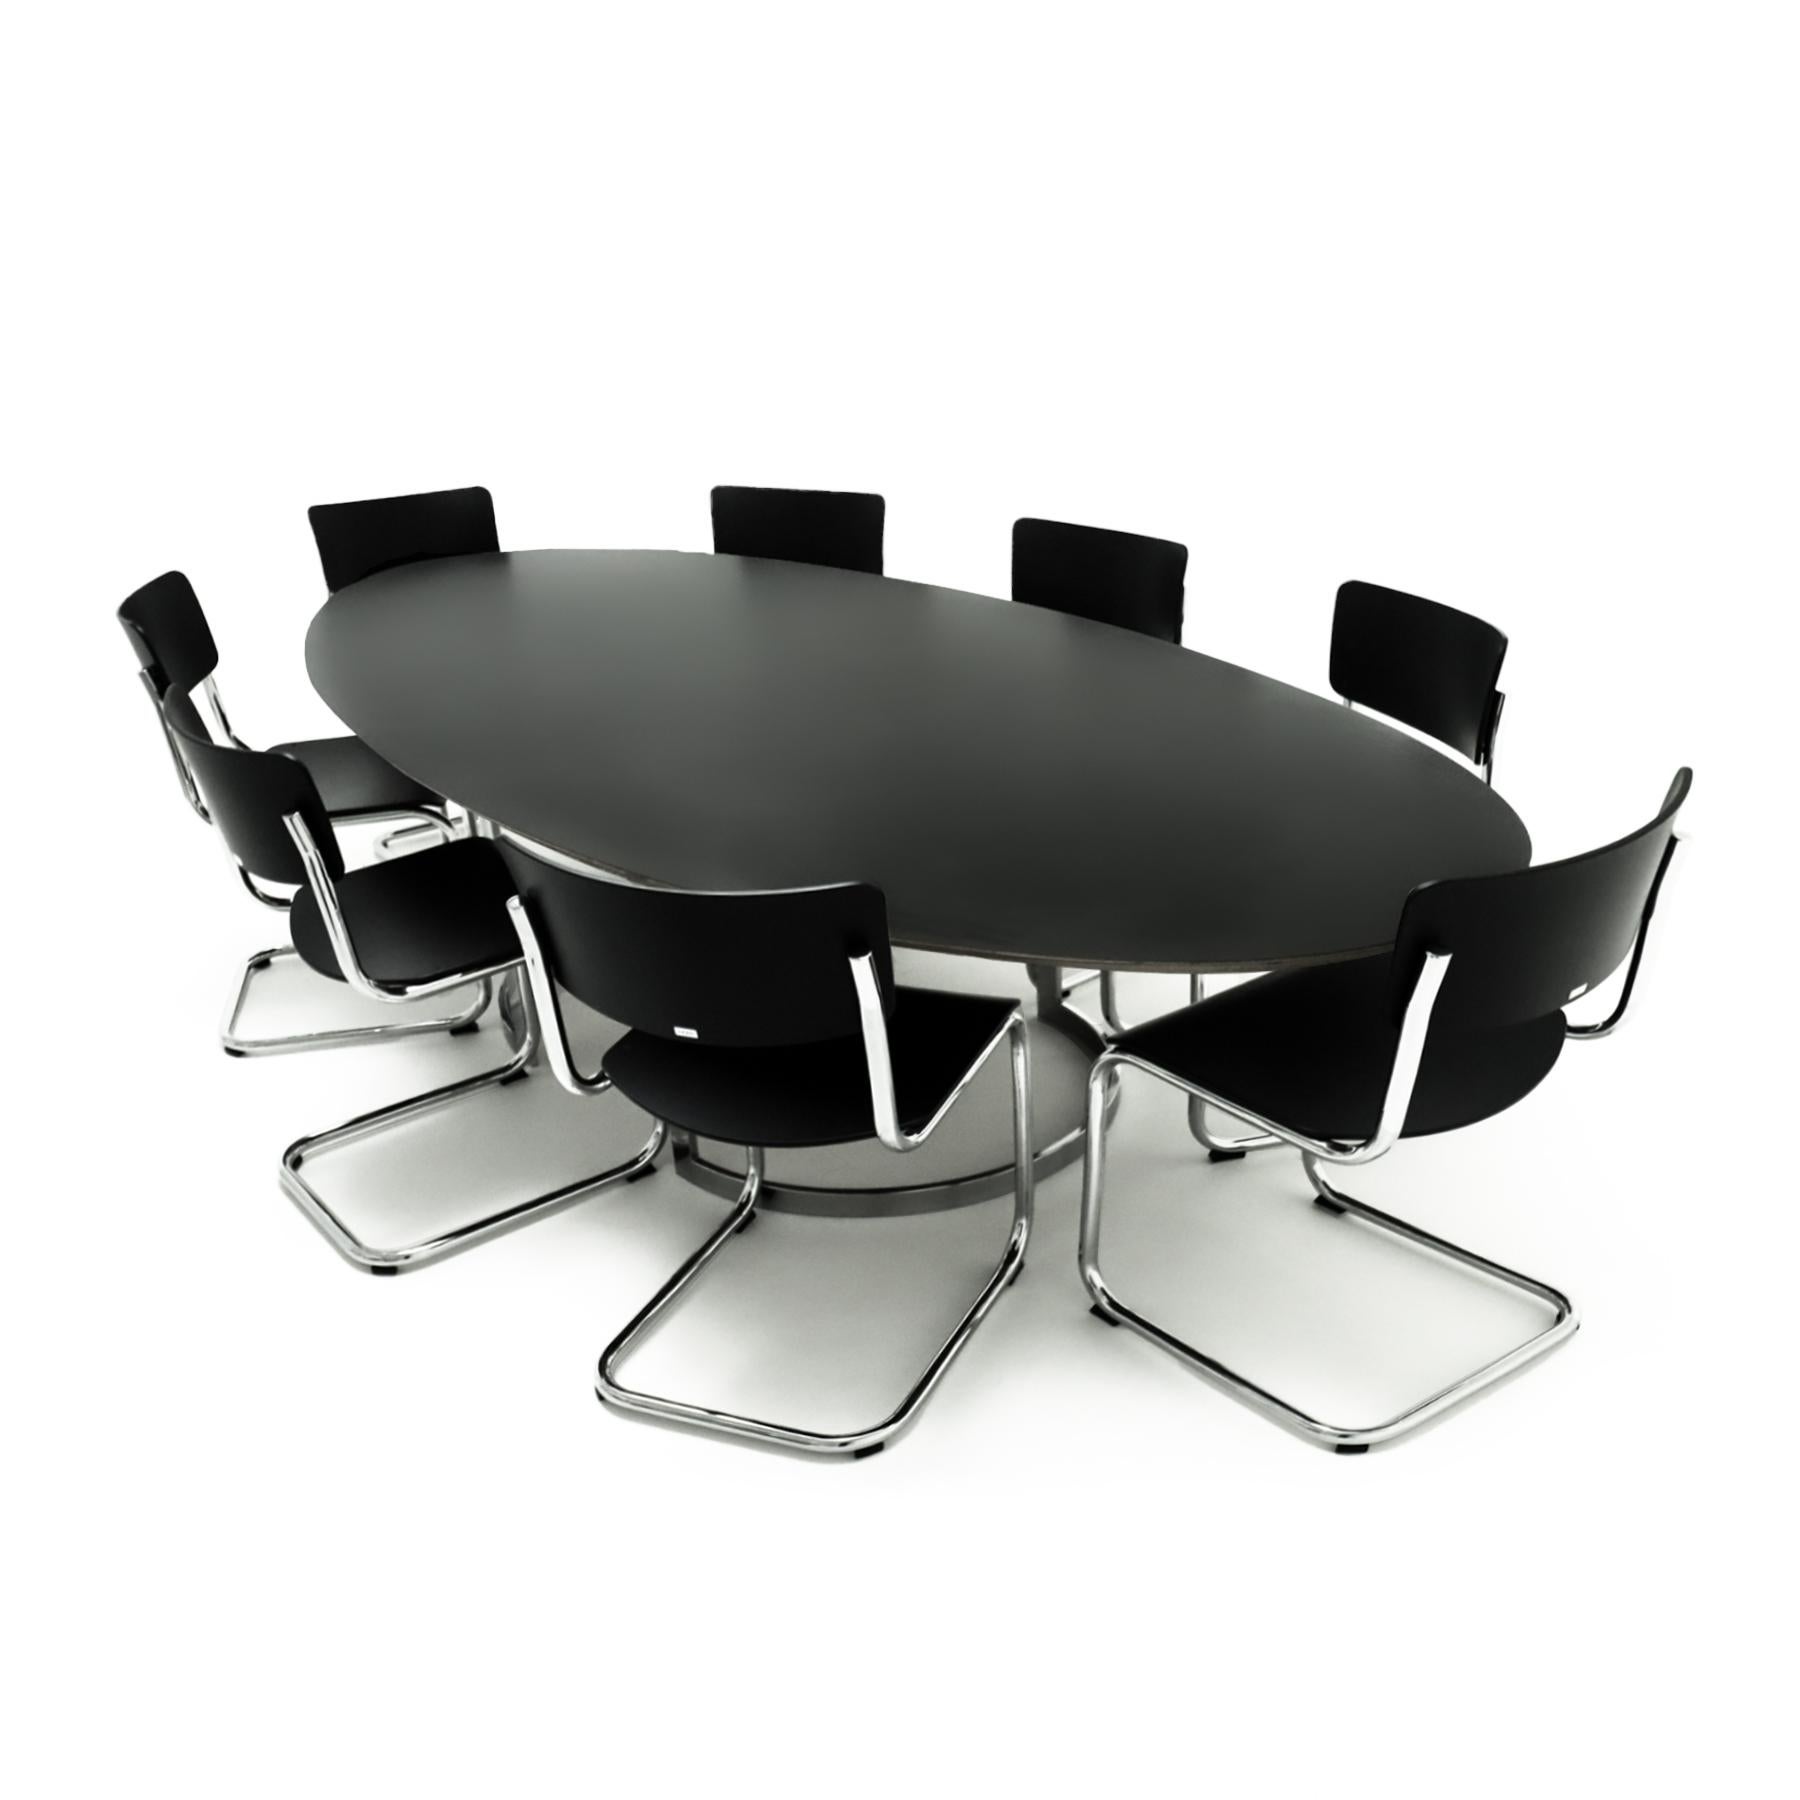 Steel 8 seat office meeting or conference room table in the style of Milo Baughman 